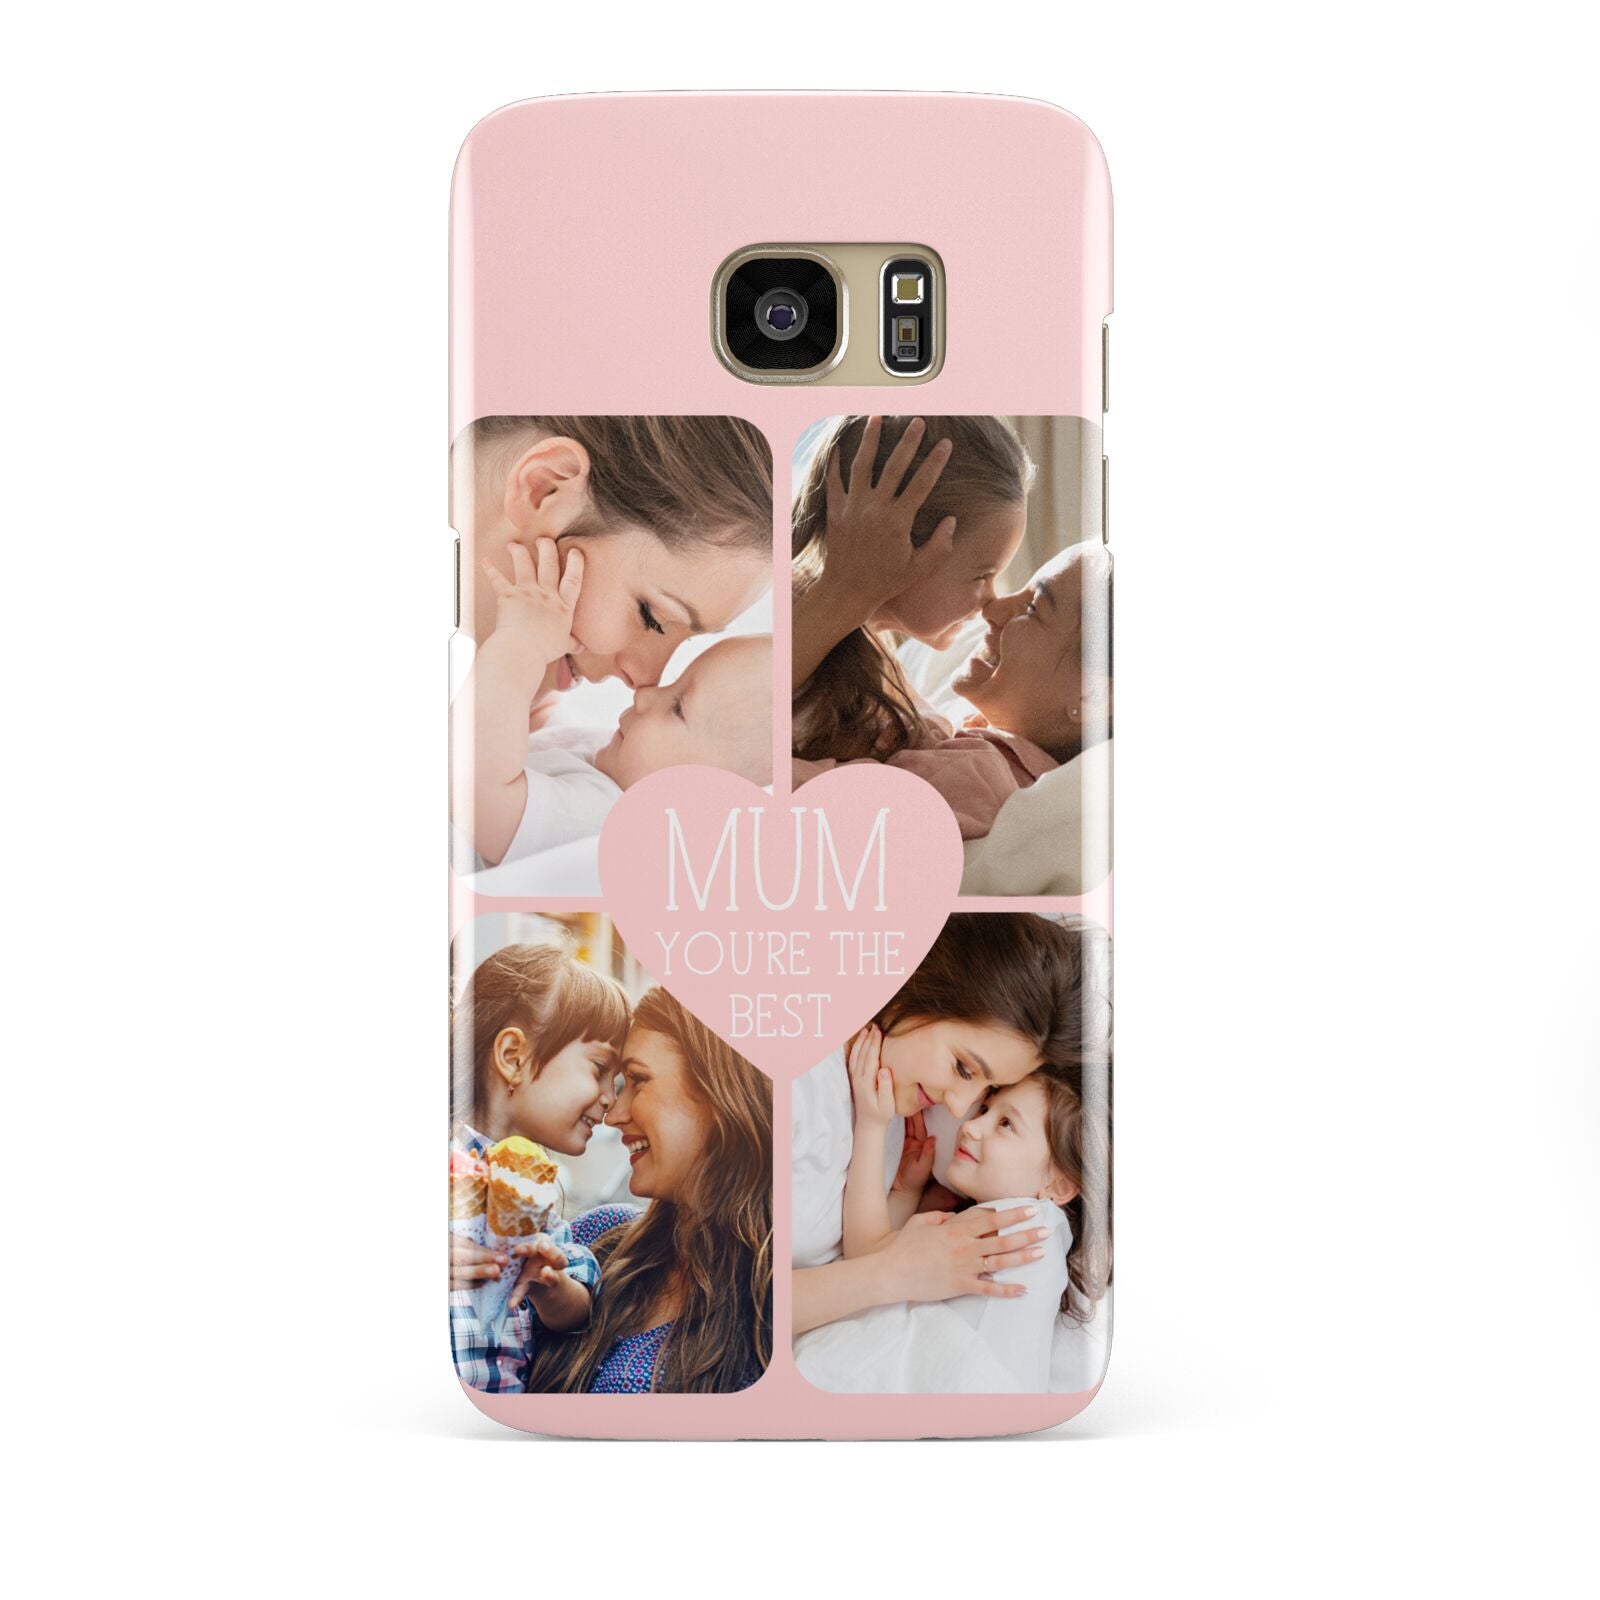 Mothers Day Four Photo Upload Samsung Galaxy S7 Edge Case